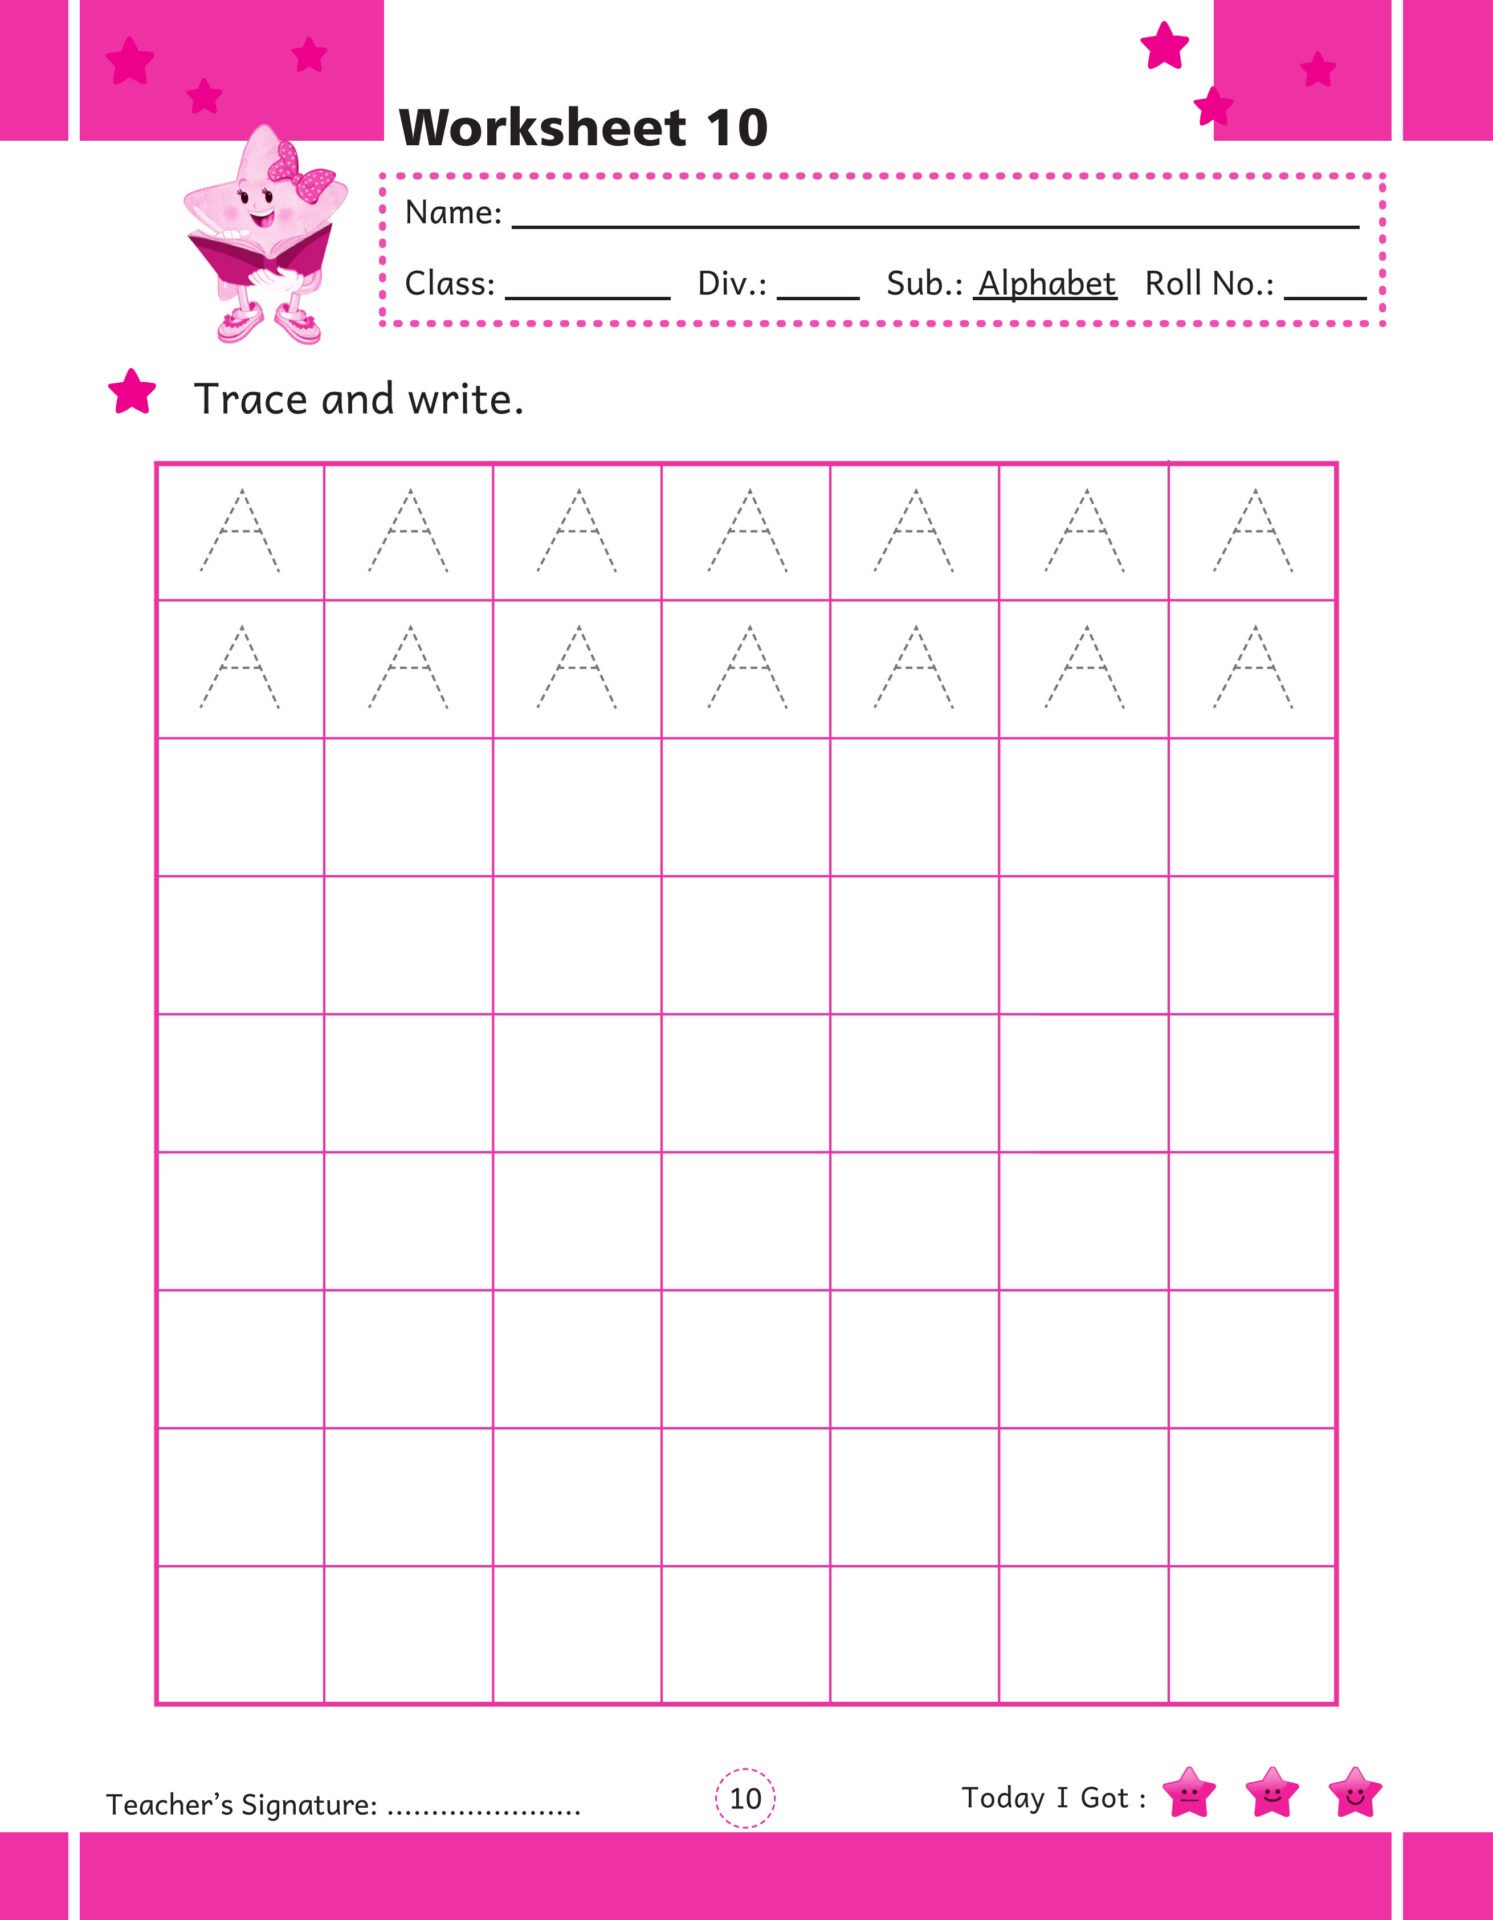 Rising Star Worksheets and Assessments A 4 1